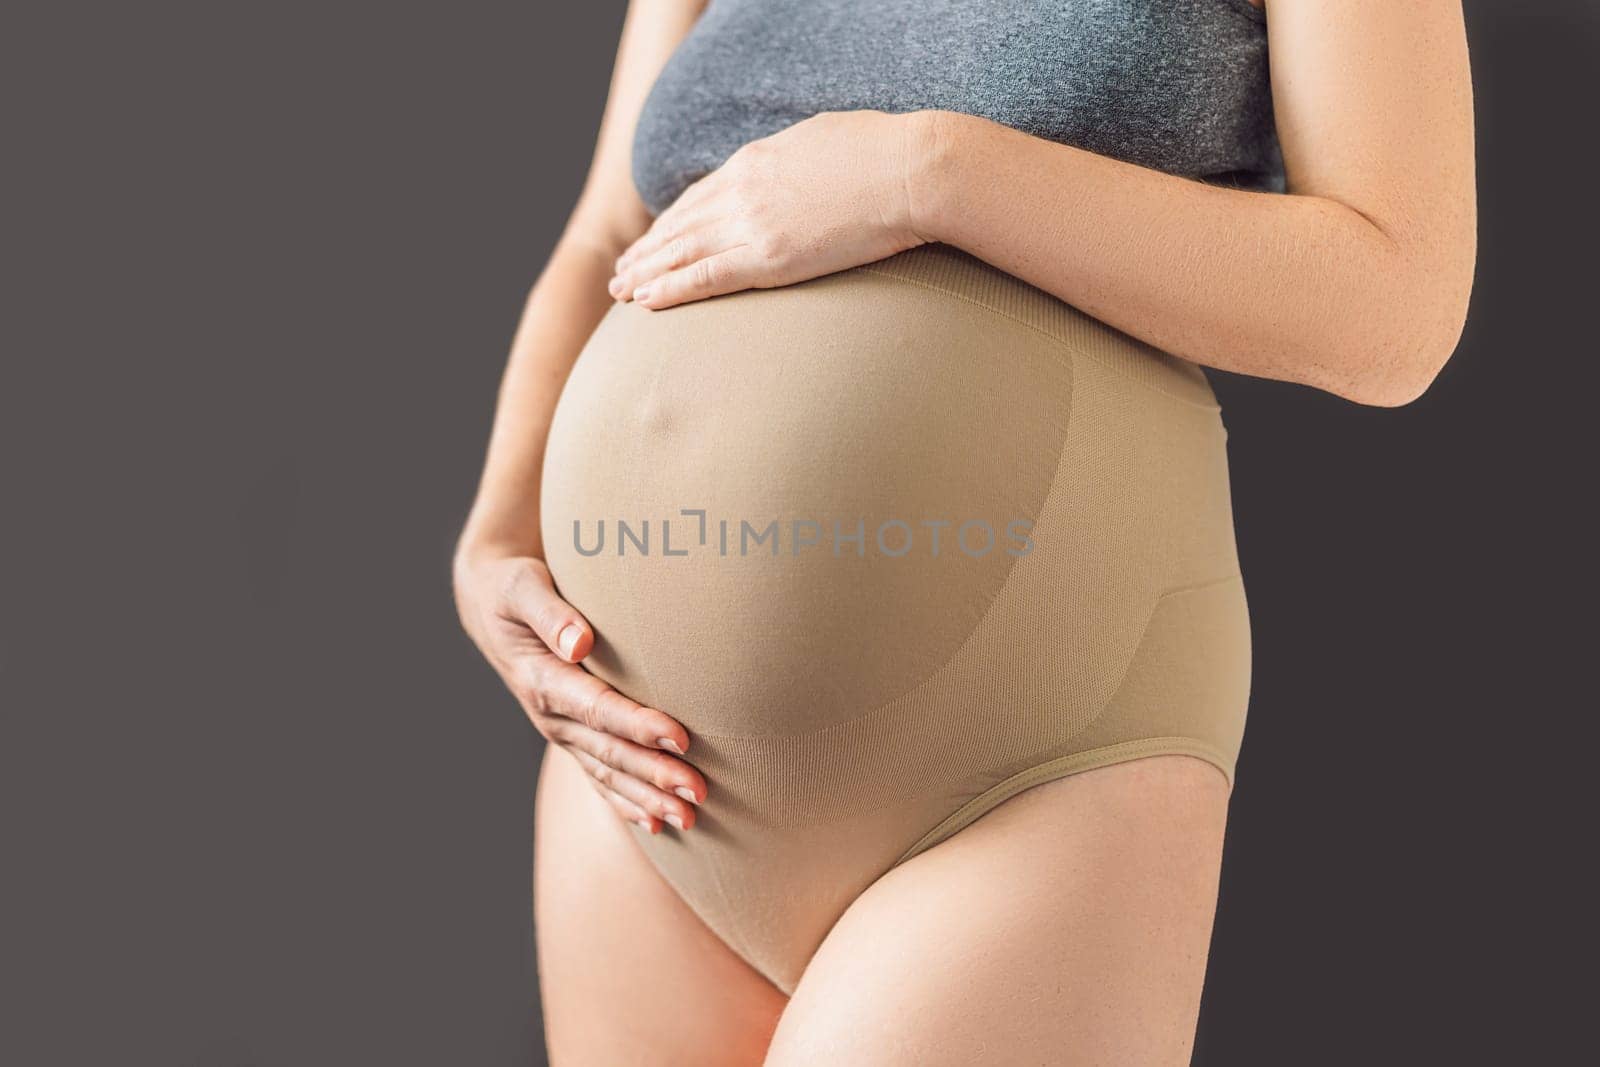 Pregnant bliss: Mom-to-be embraces her baby bump with a soft fabric bandage, providing gentle support. Maternity made comfortable.